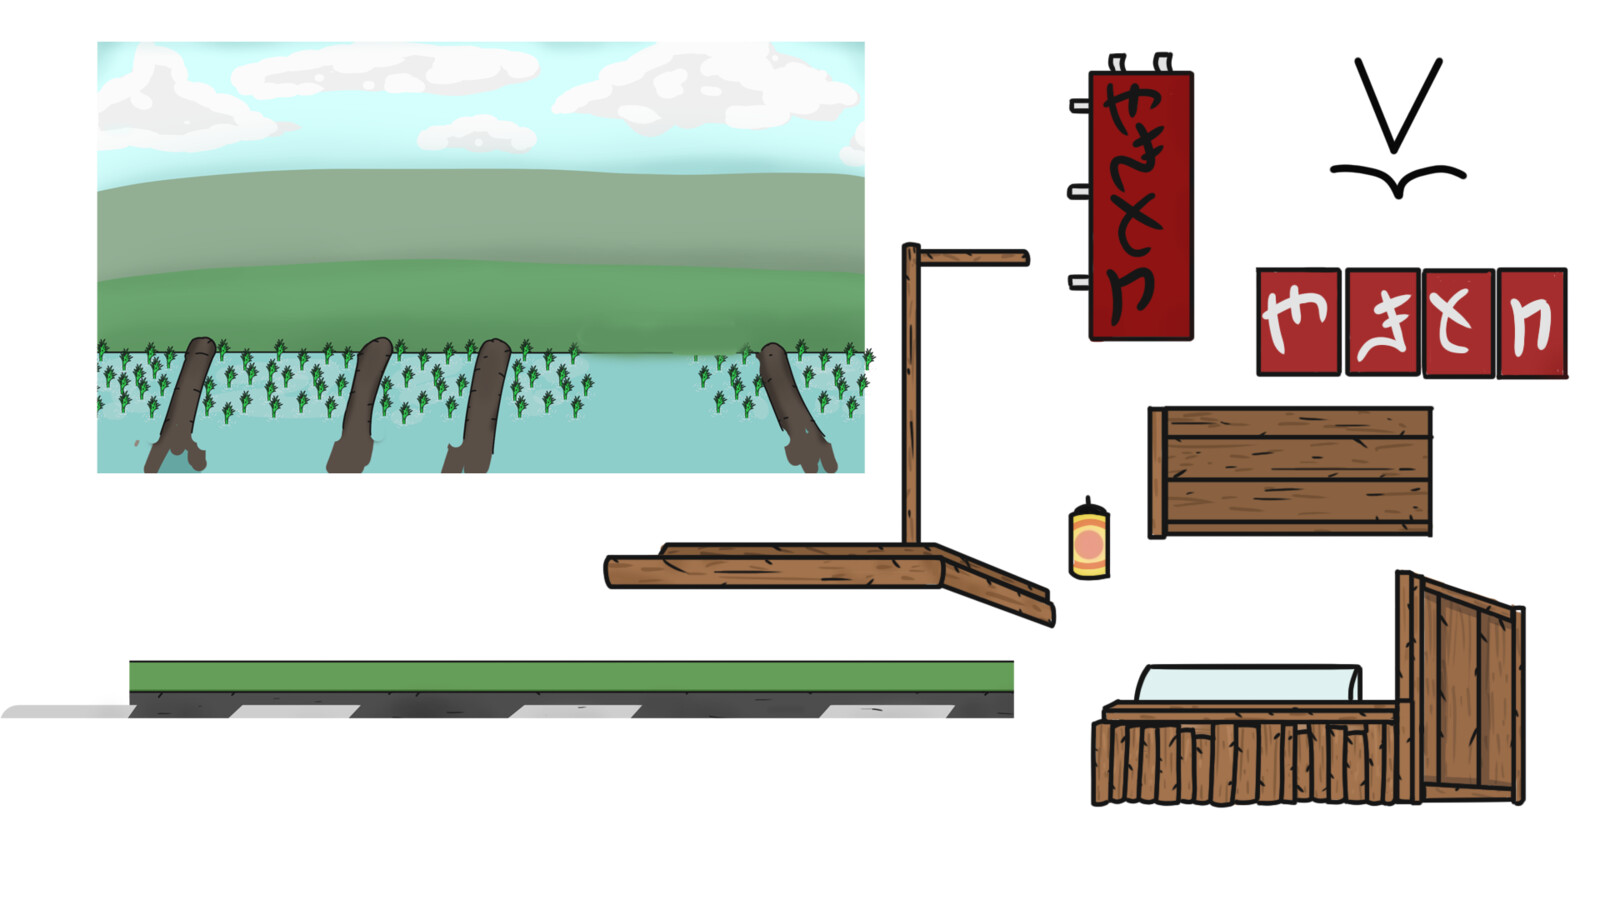 The objects that were used for the animation. The background looks rough, but it's complemented by the food stand covering it. I didn't pay as much time to the background, because I focused on the foreground animation.